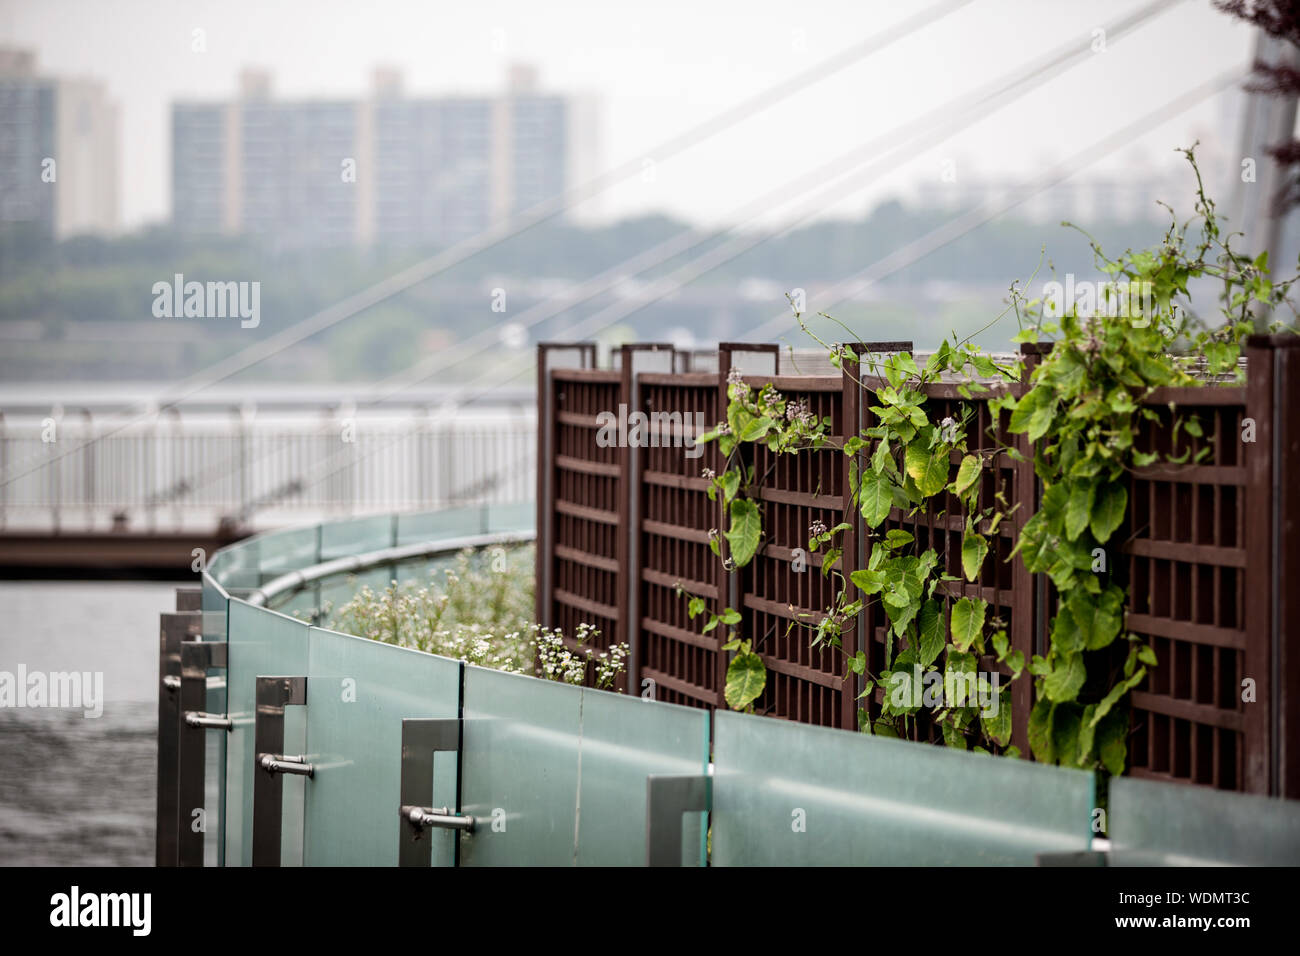 Fence By Han River Stock Photo